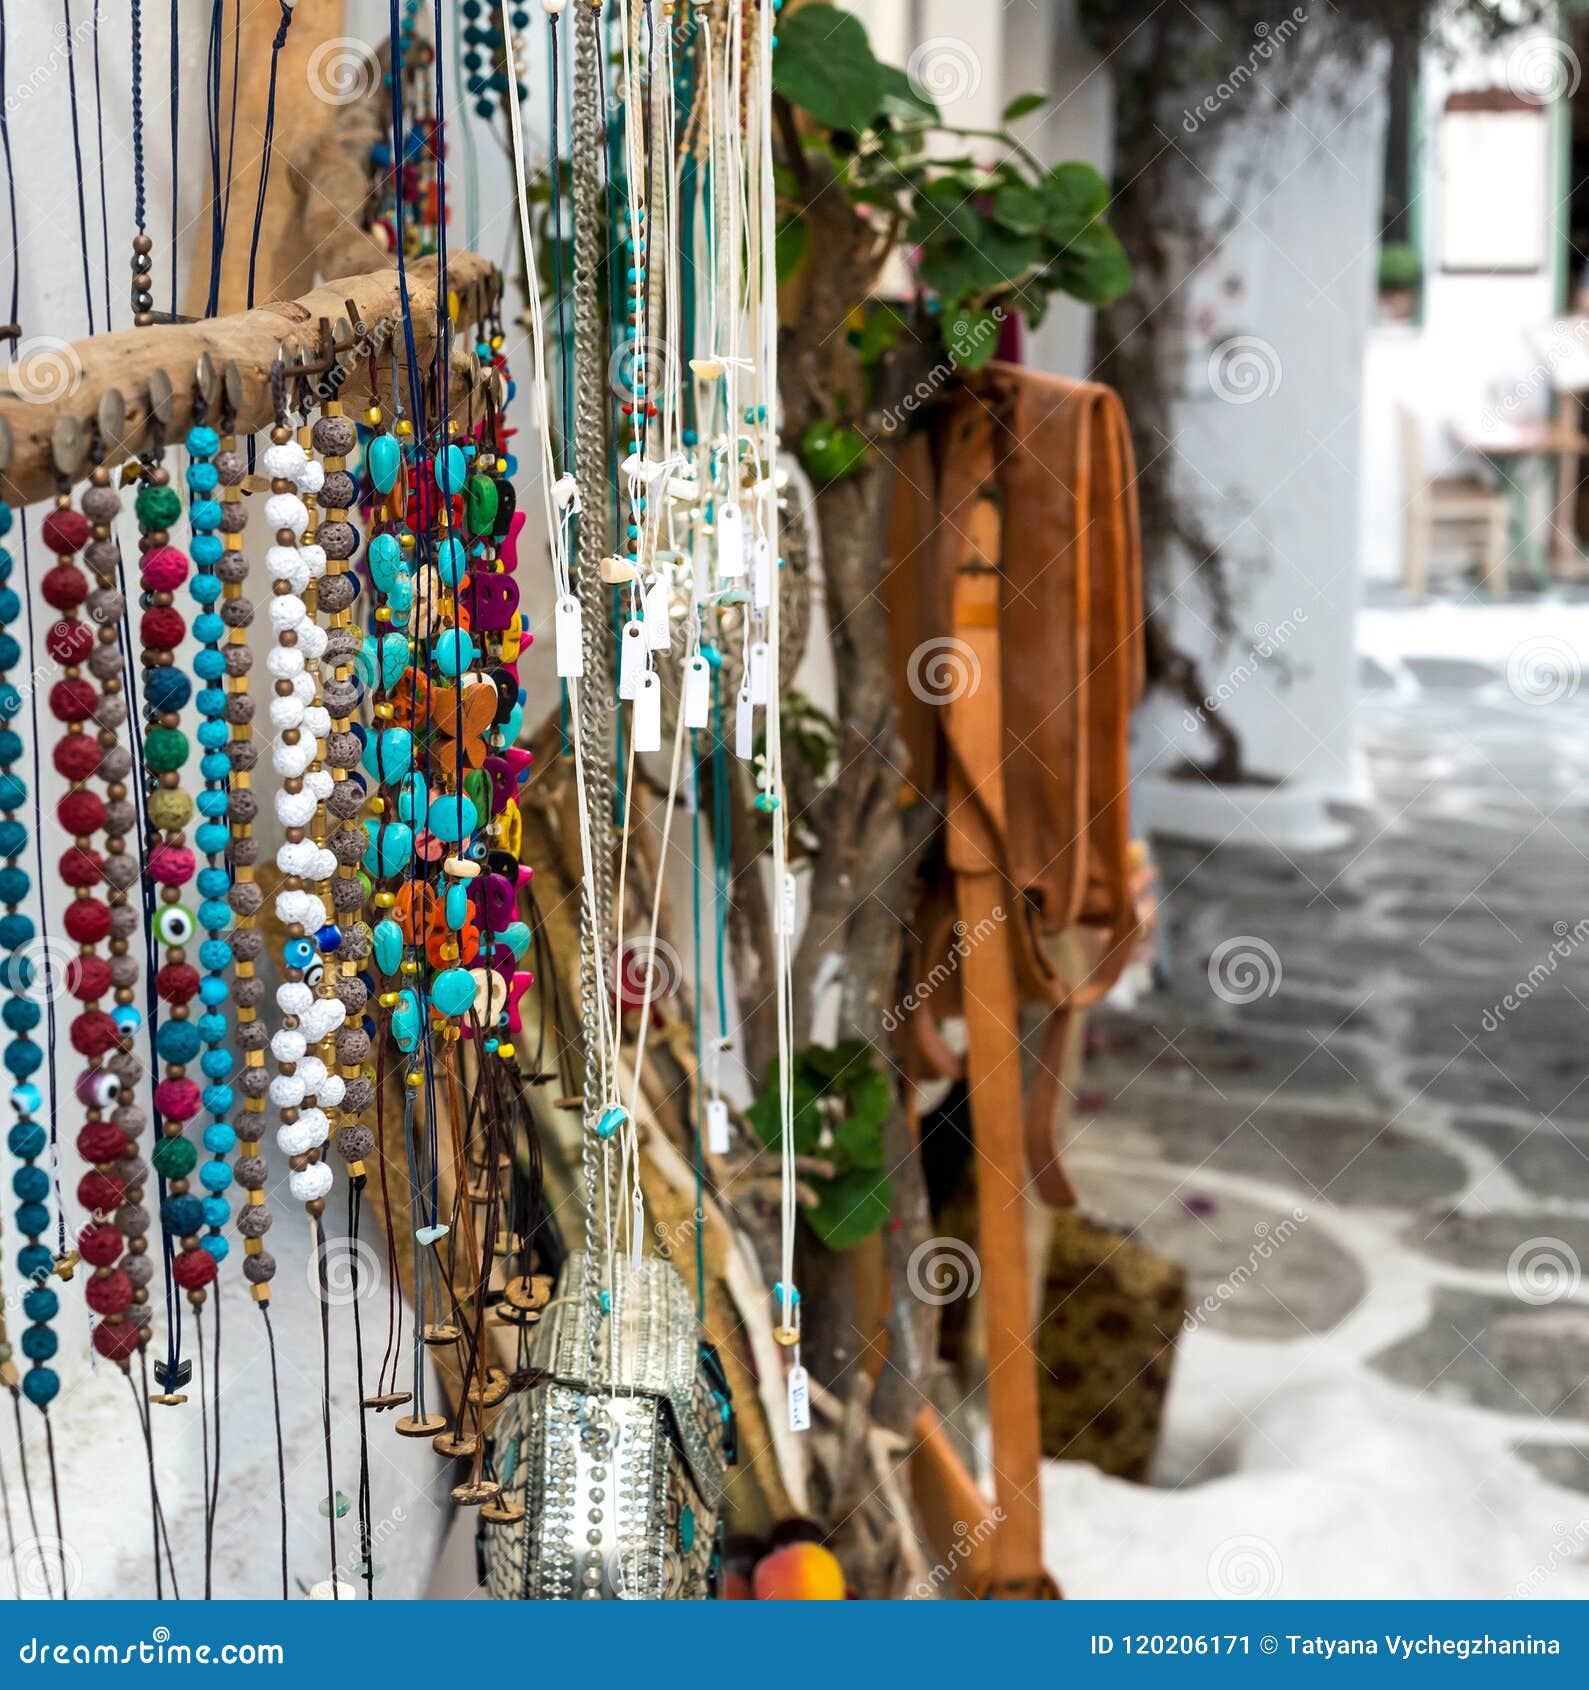 Sygdom vride paperback Jewelry and Accessories at the Street Market in Greece Stock Image - Image  of crete, europe: 120206171